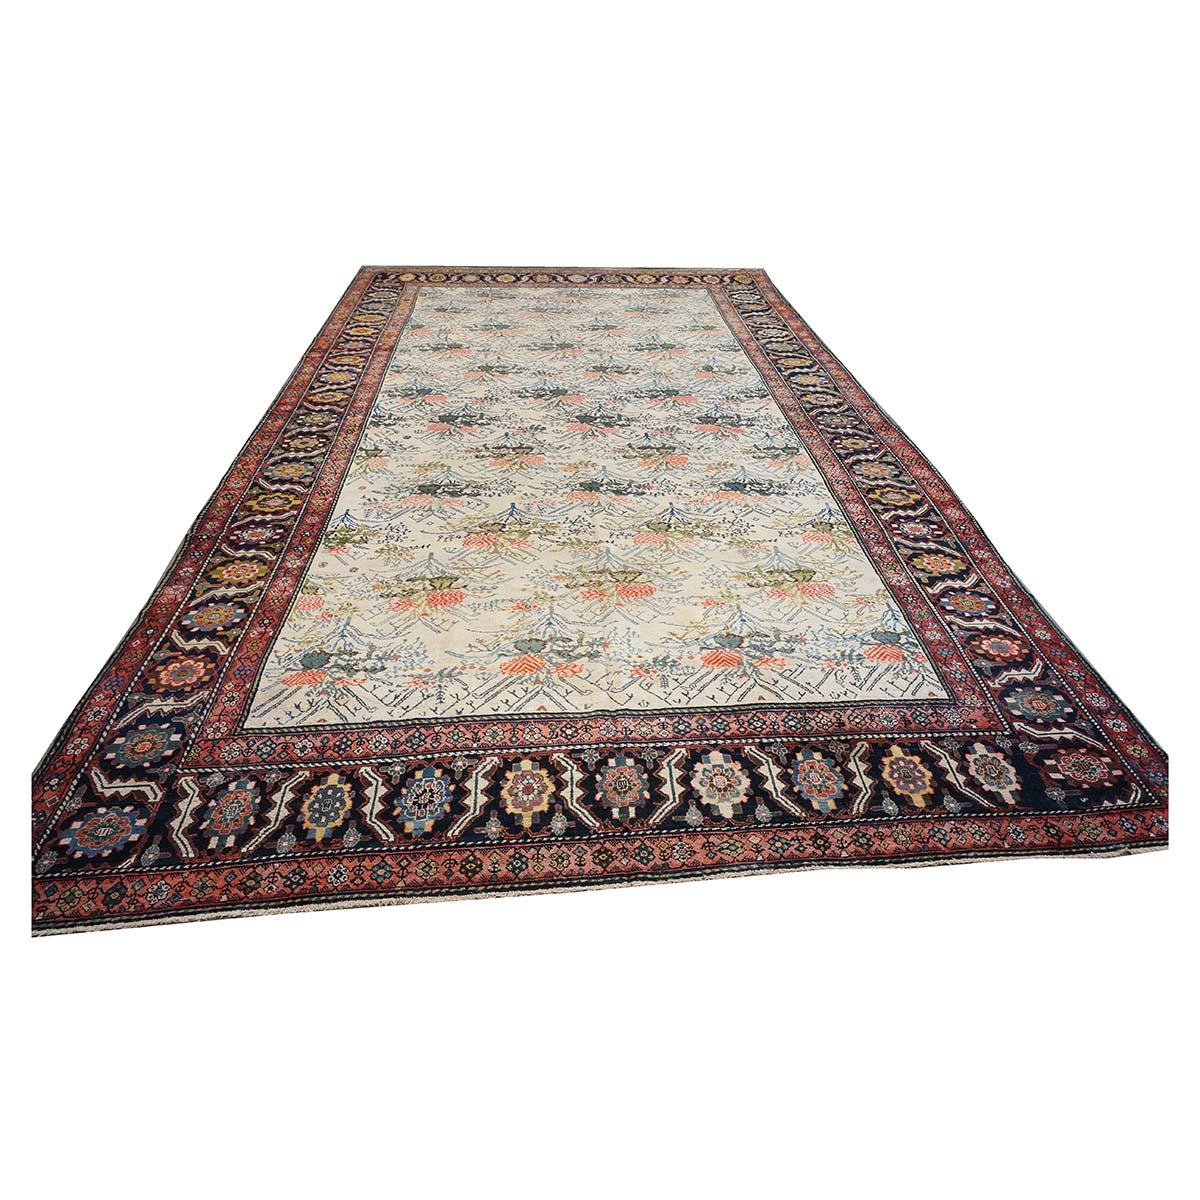 19th Century Large Antique Persian Malayer 11x18 Handwoven Rug In Good Condition For Sale In Houston, TX